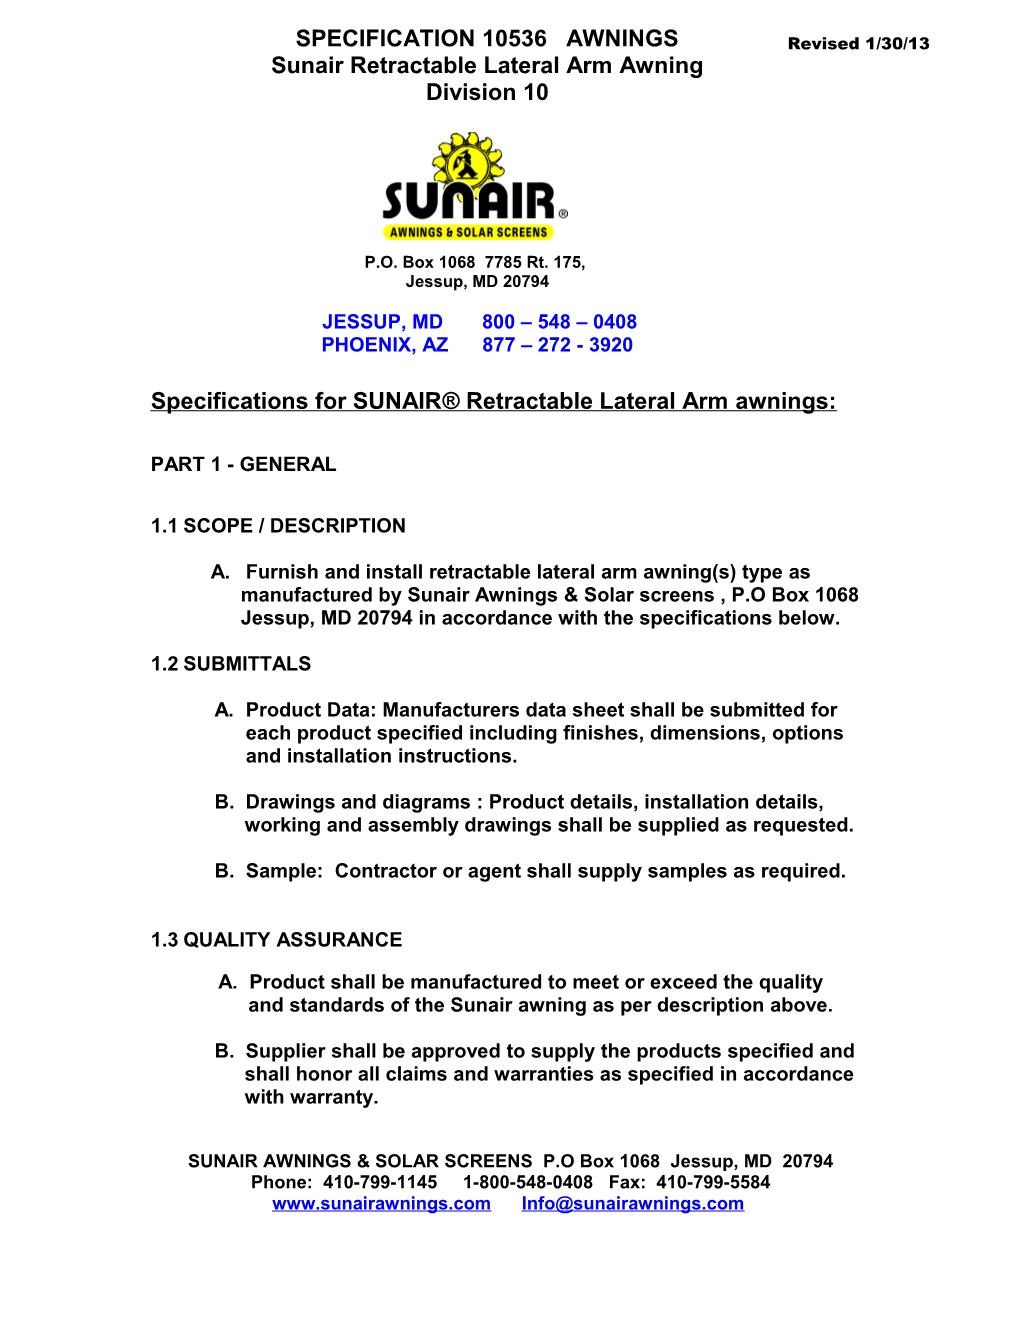 Specifications for SUNAIR Retractable Awnings